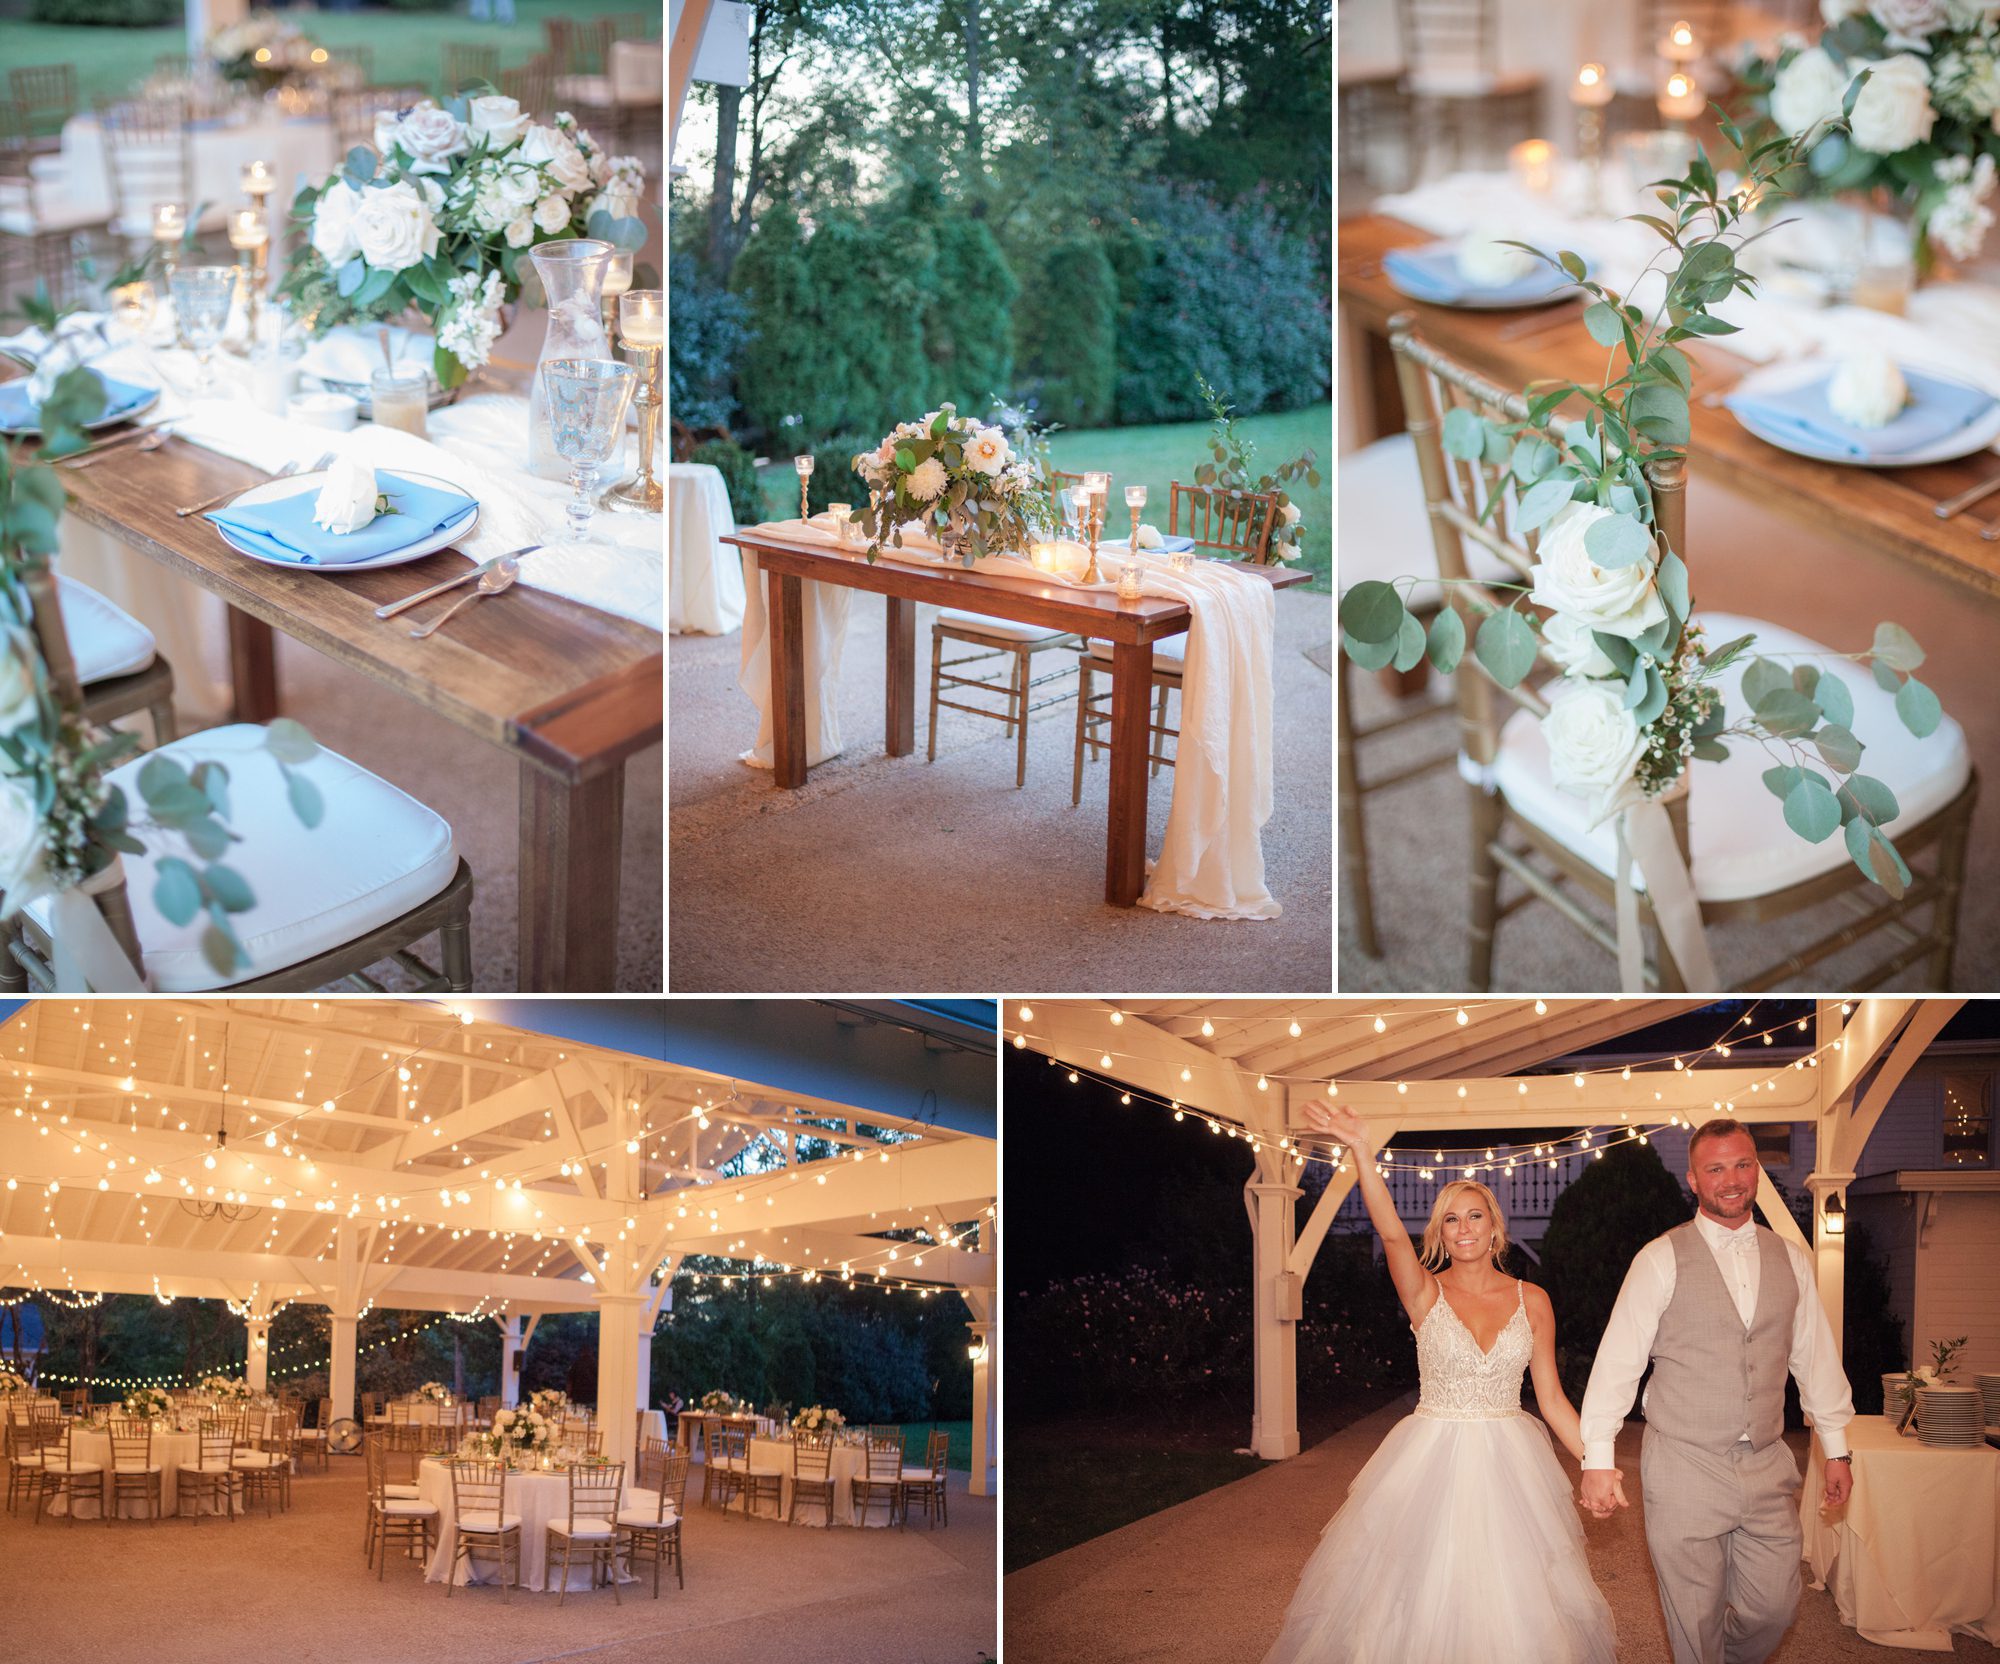 Photo of wedding reception details after wedding ceremony. Wedding photography at Cedarwood Weddings and Estate in Nashville, TN photography by Krista Lee Photography